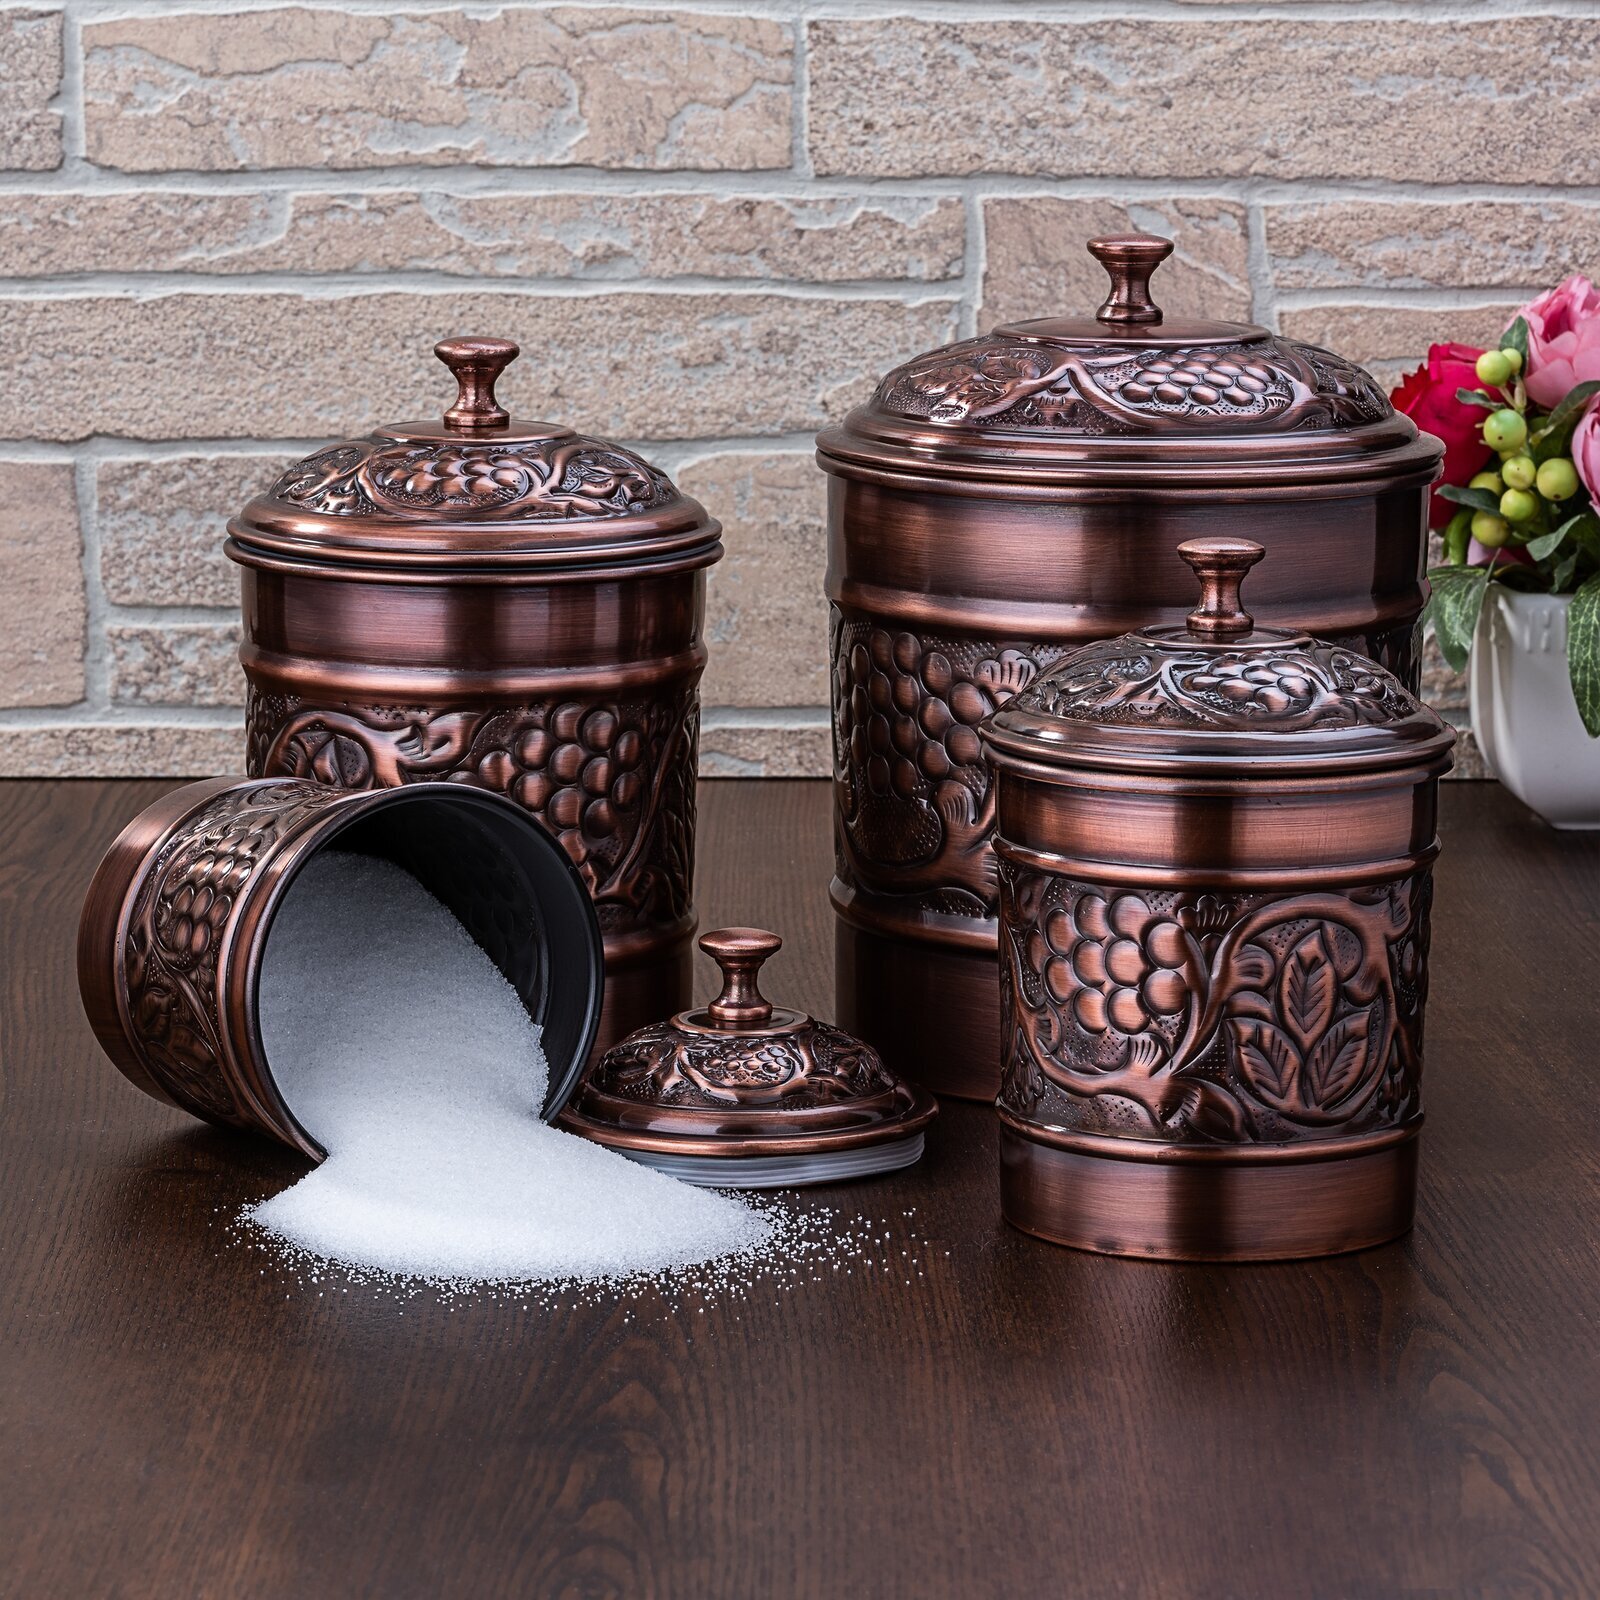 Metal Decorative Kitchen Containers   